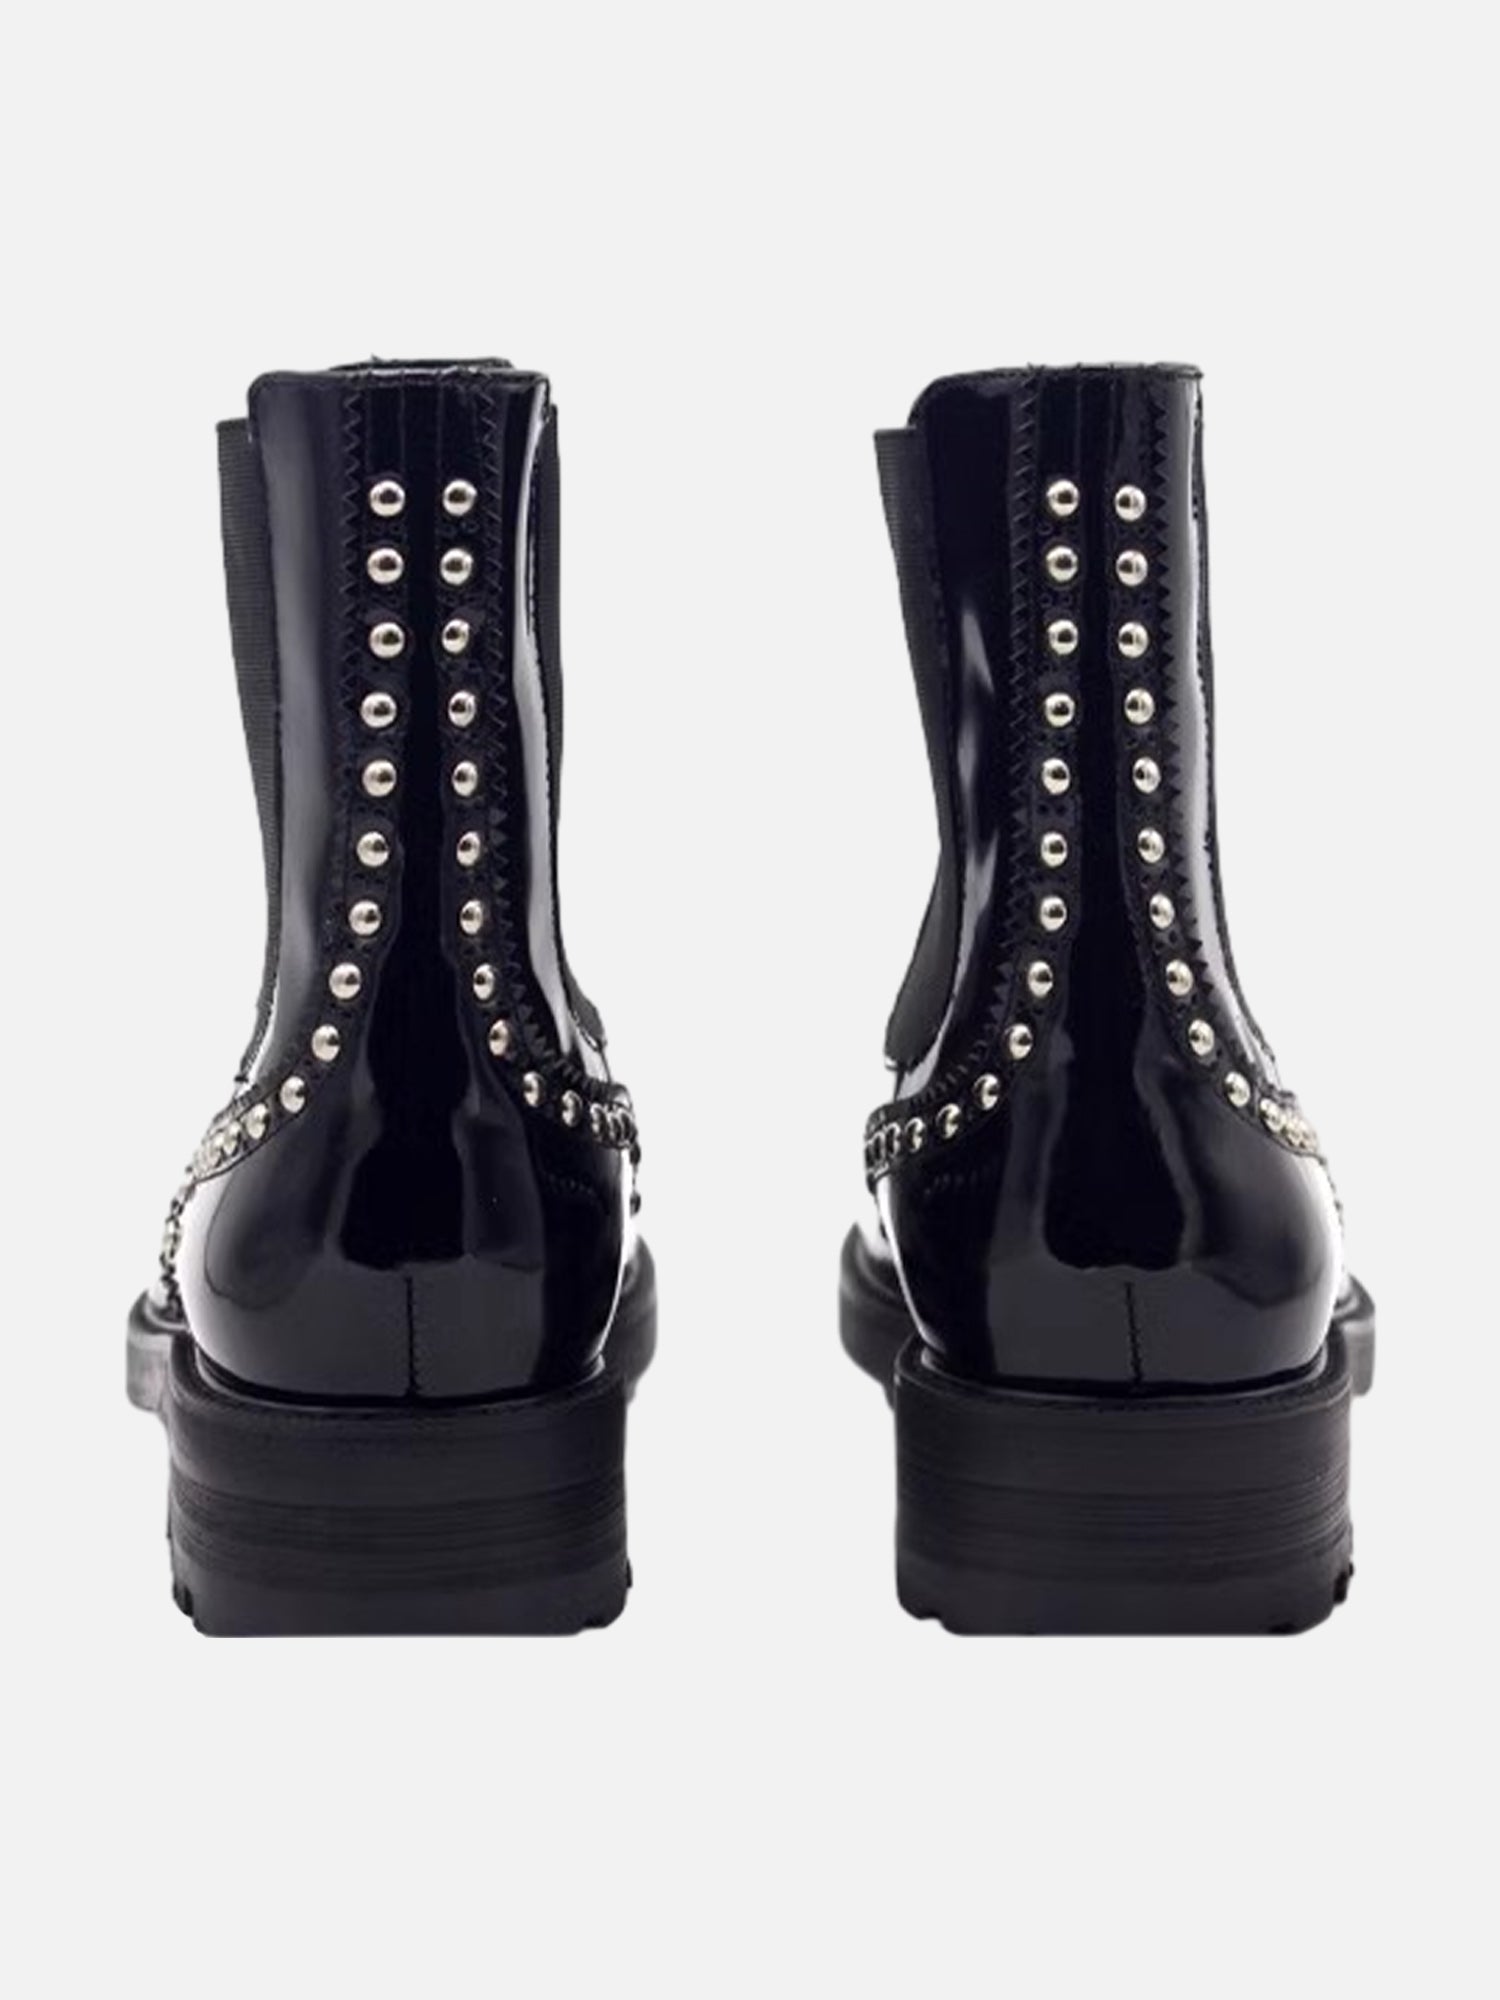 Trendy Handmade Pointed Toe Carved Leather Studded Chelsea Boots